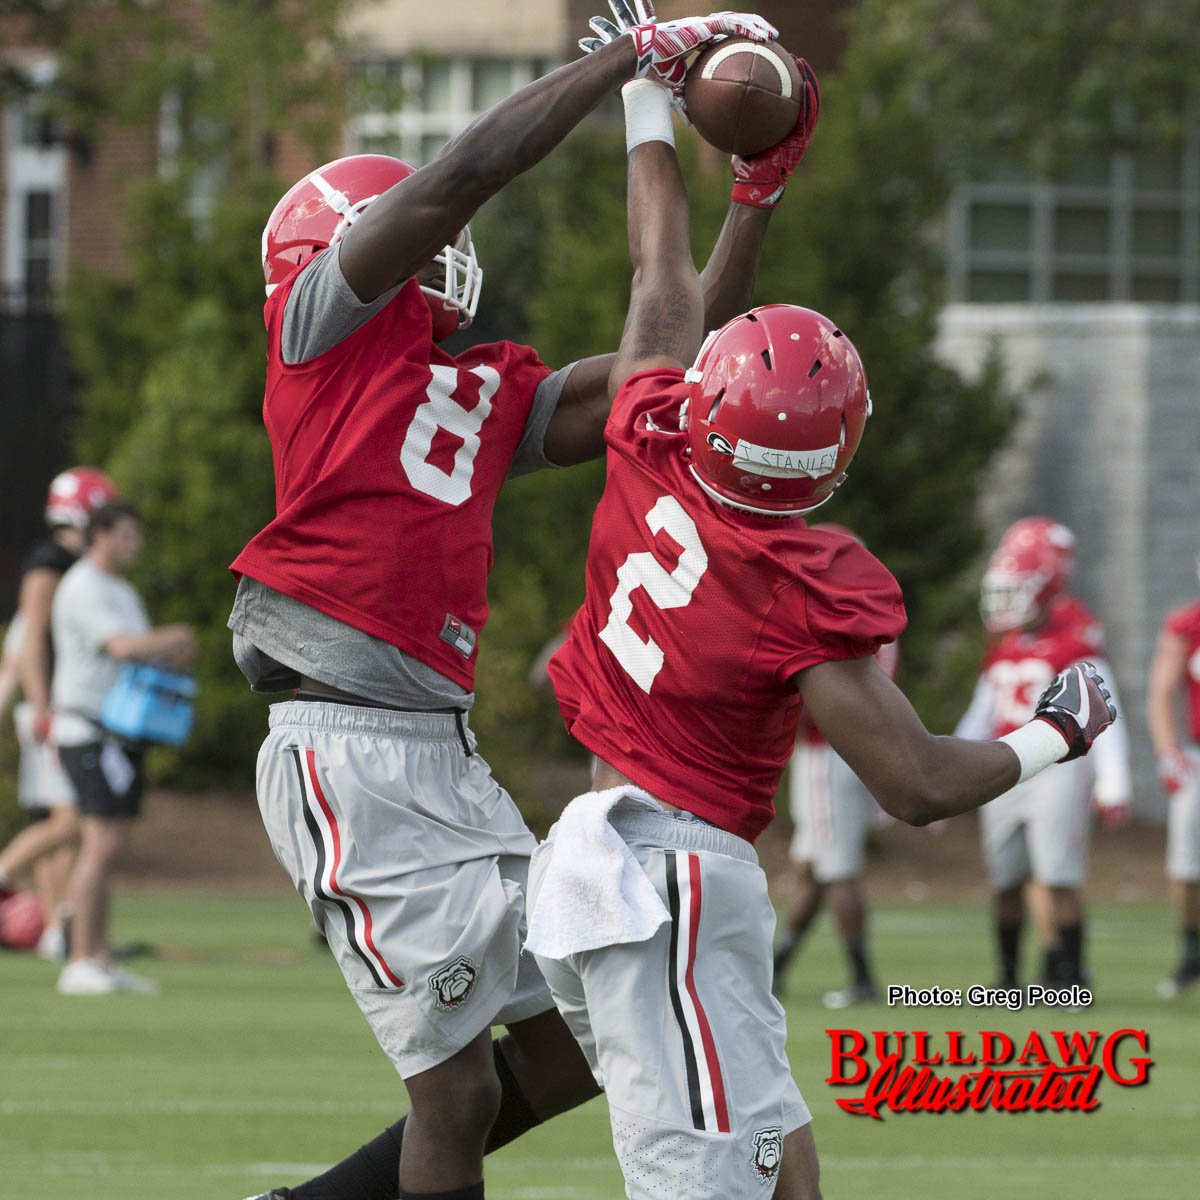 Riley Ridley grabs the pass as Jayson Stanley defends